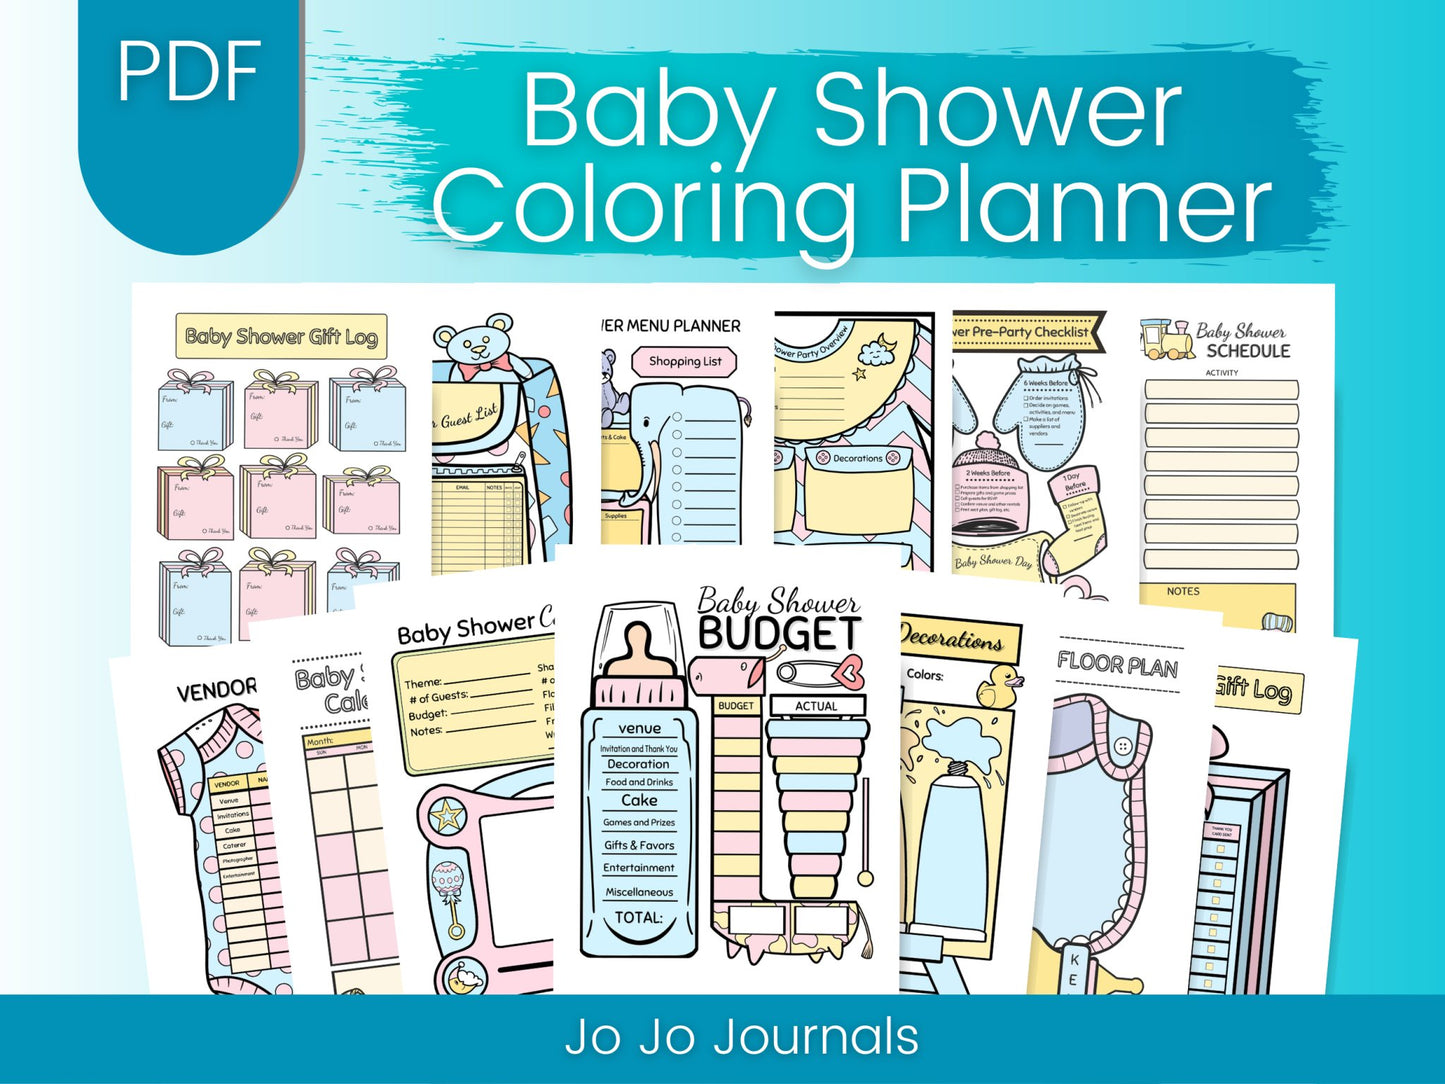 Colorful Baby Shower Planner- 6x9 inches - Fiesta By JoJo Journals